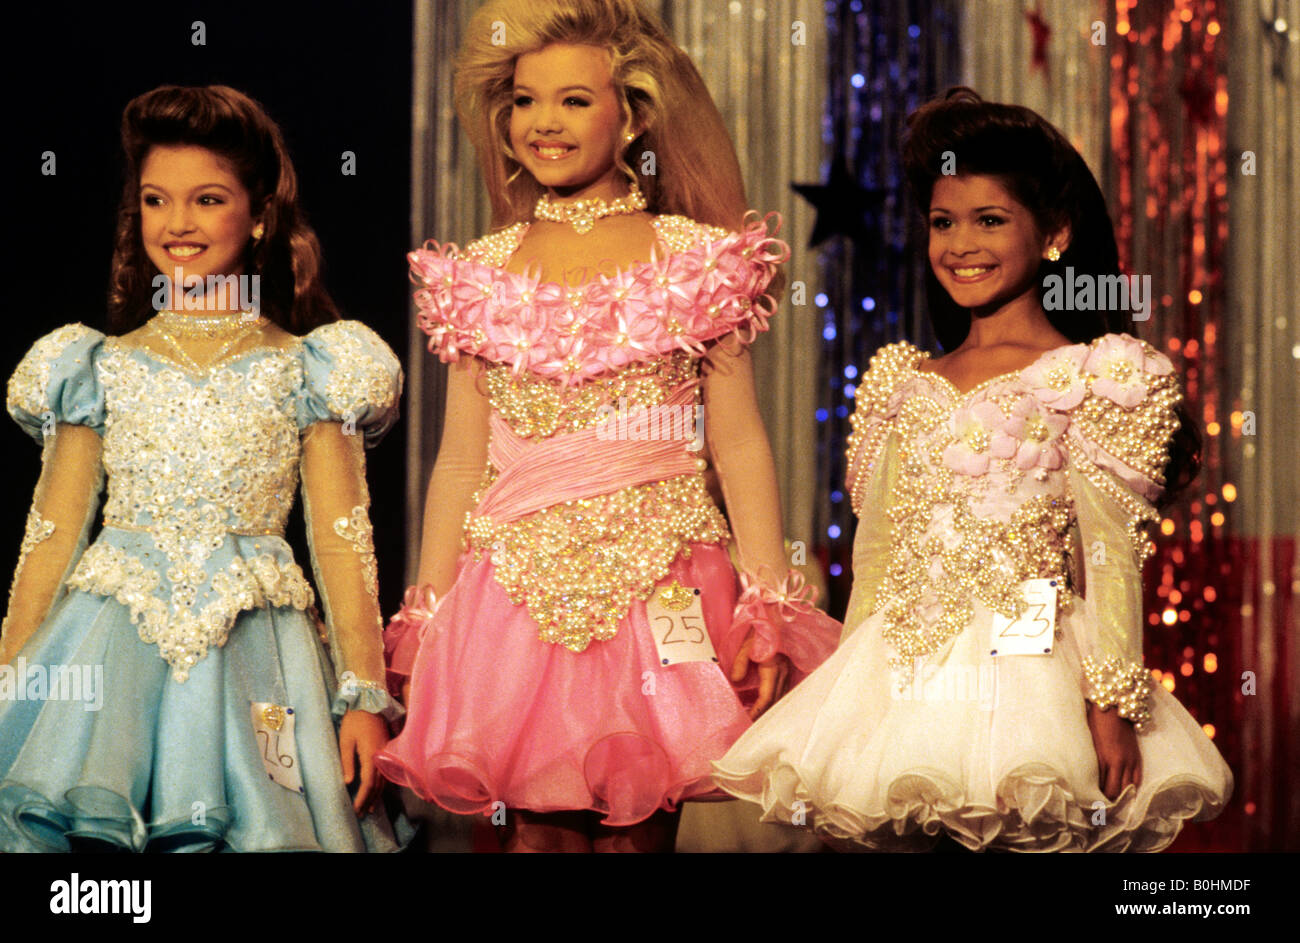 Young contestants at a junior beauty pageant, USA. Stock Photo